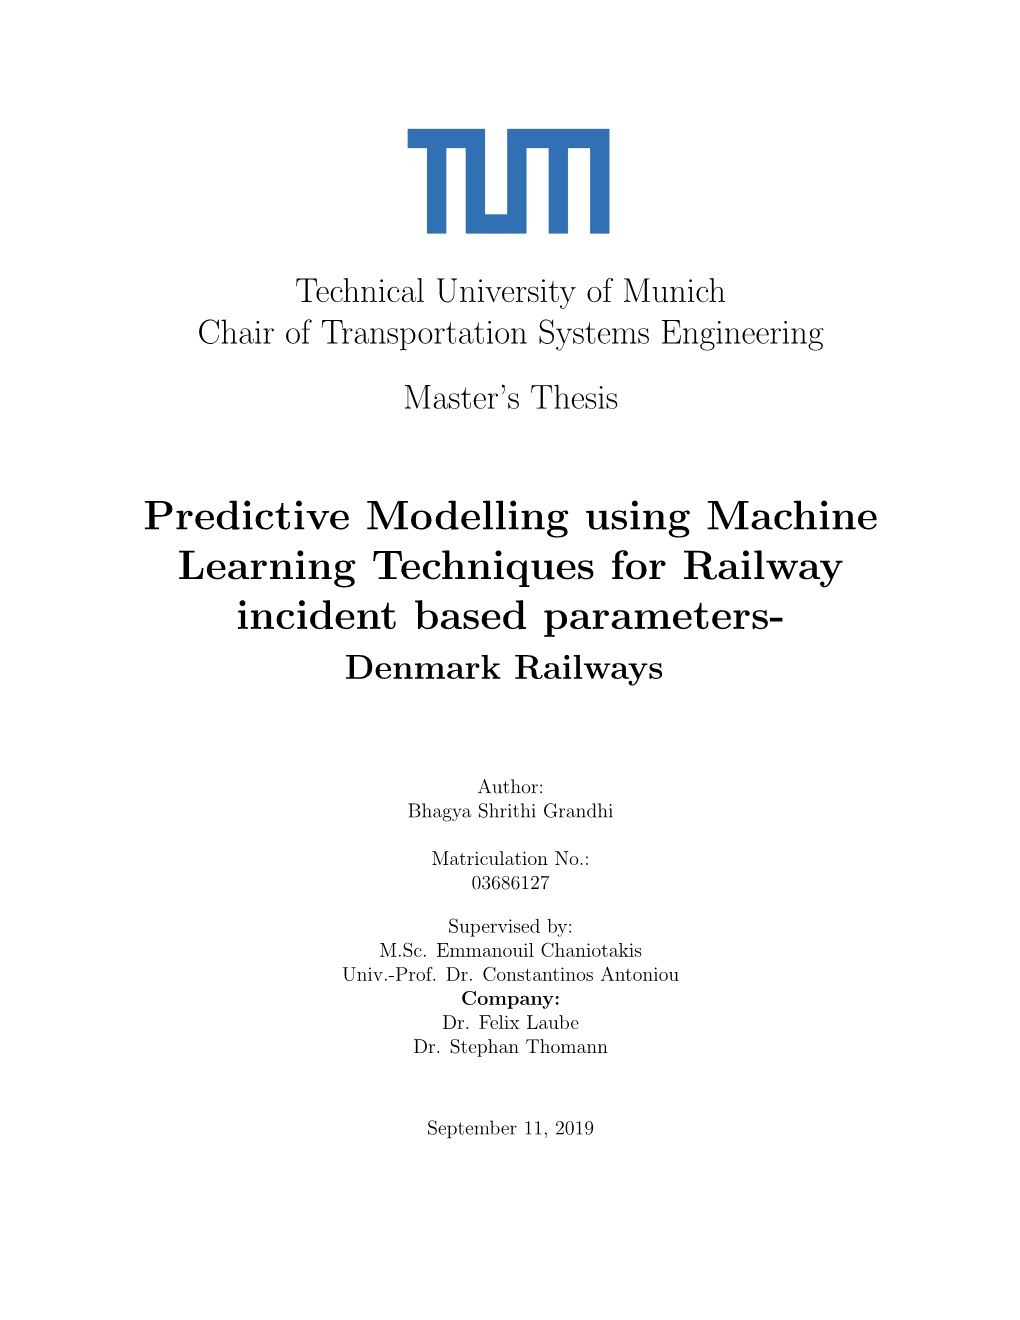 Predictive Modelling Using Machine Learning Techniques for Railway Incident Based Parameters- Denmark Railways